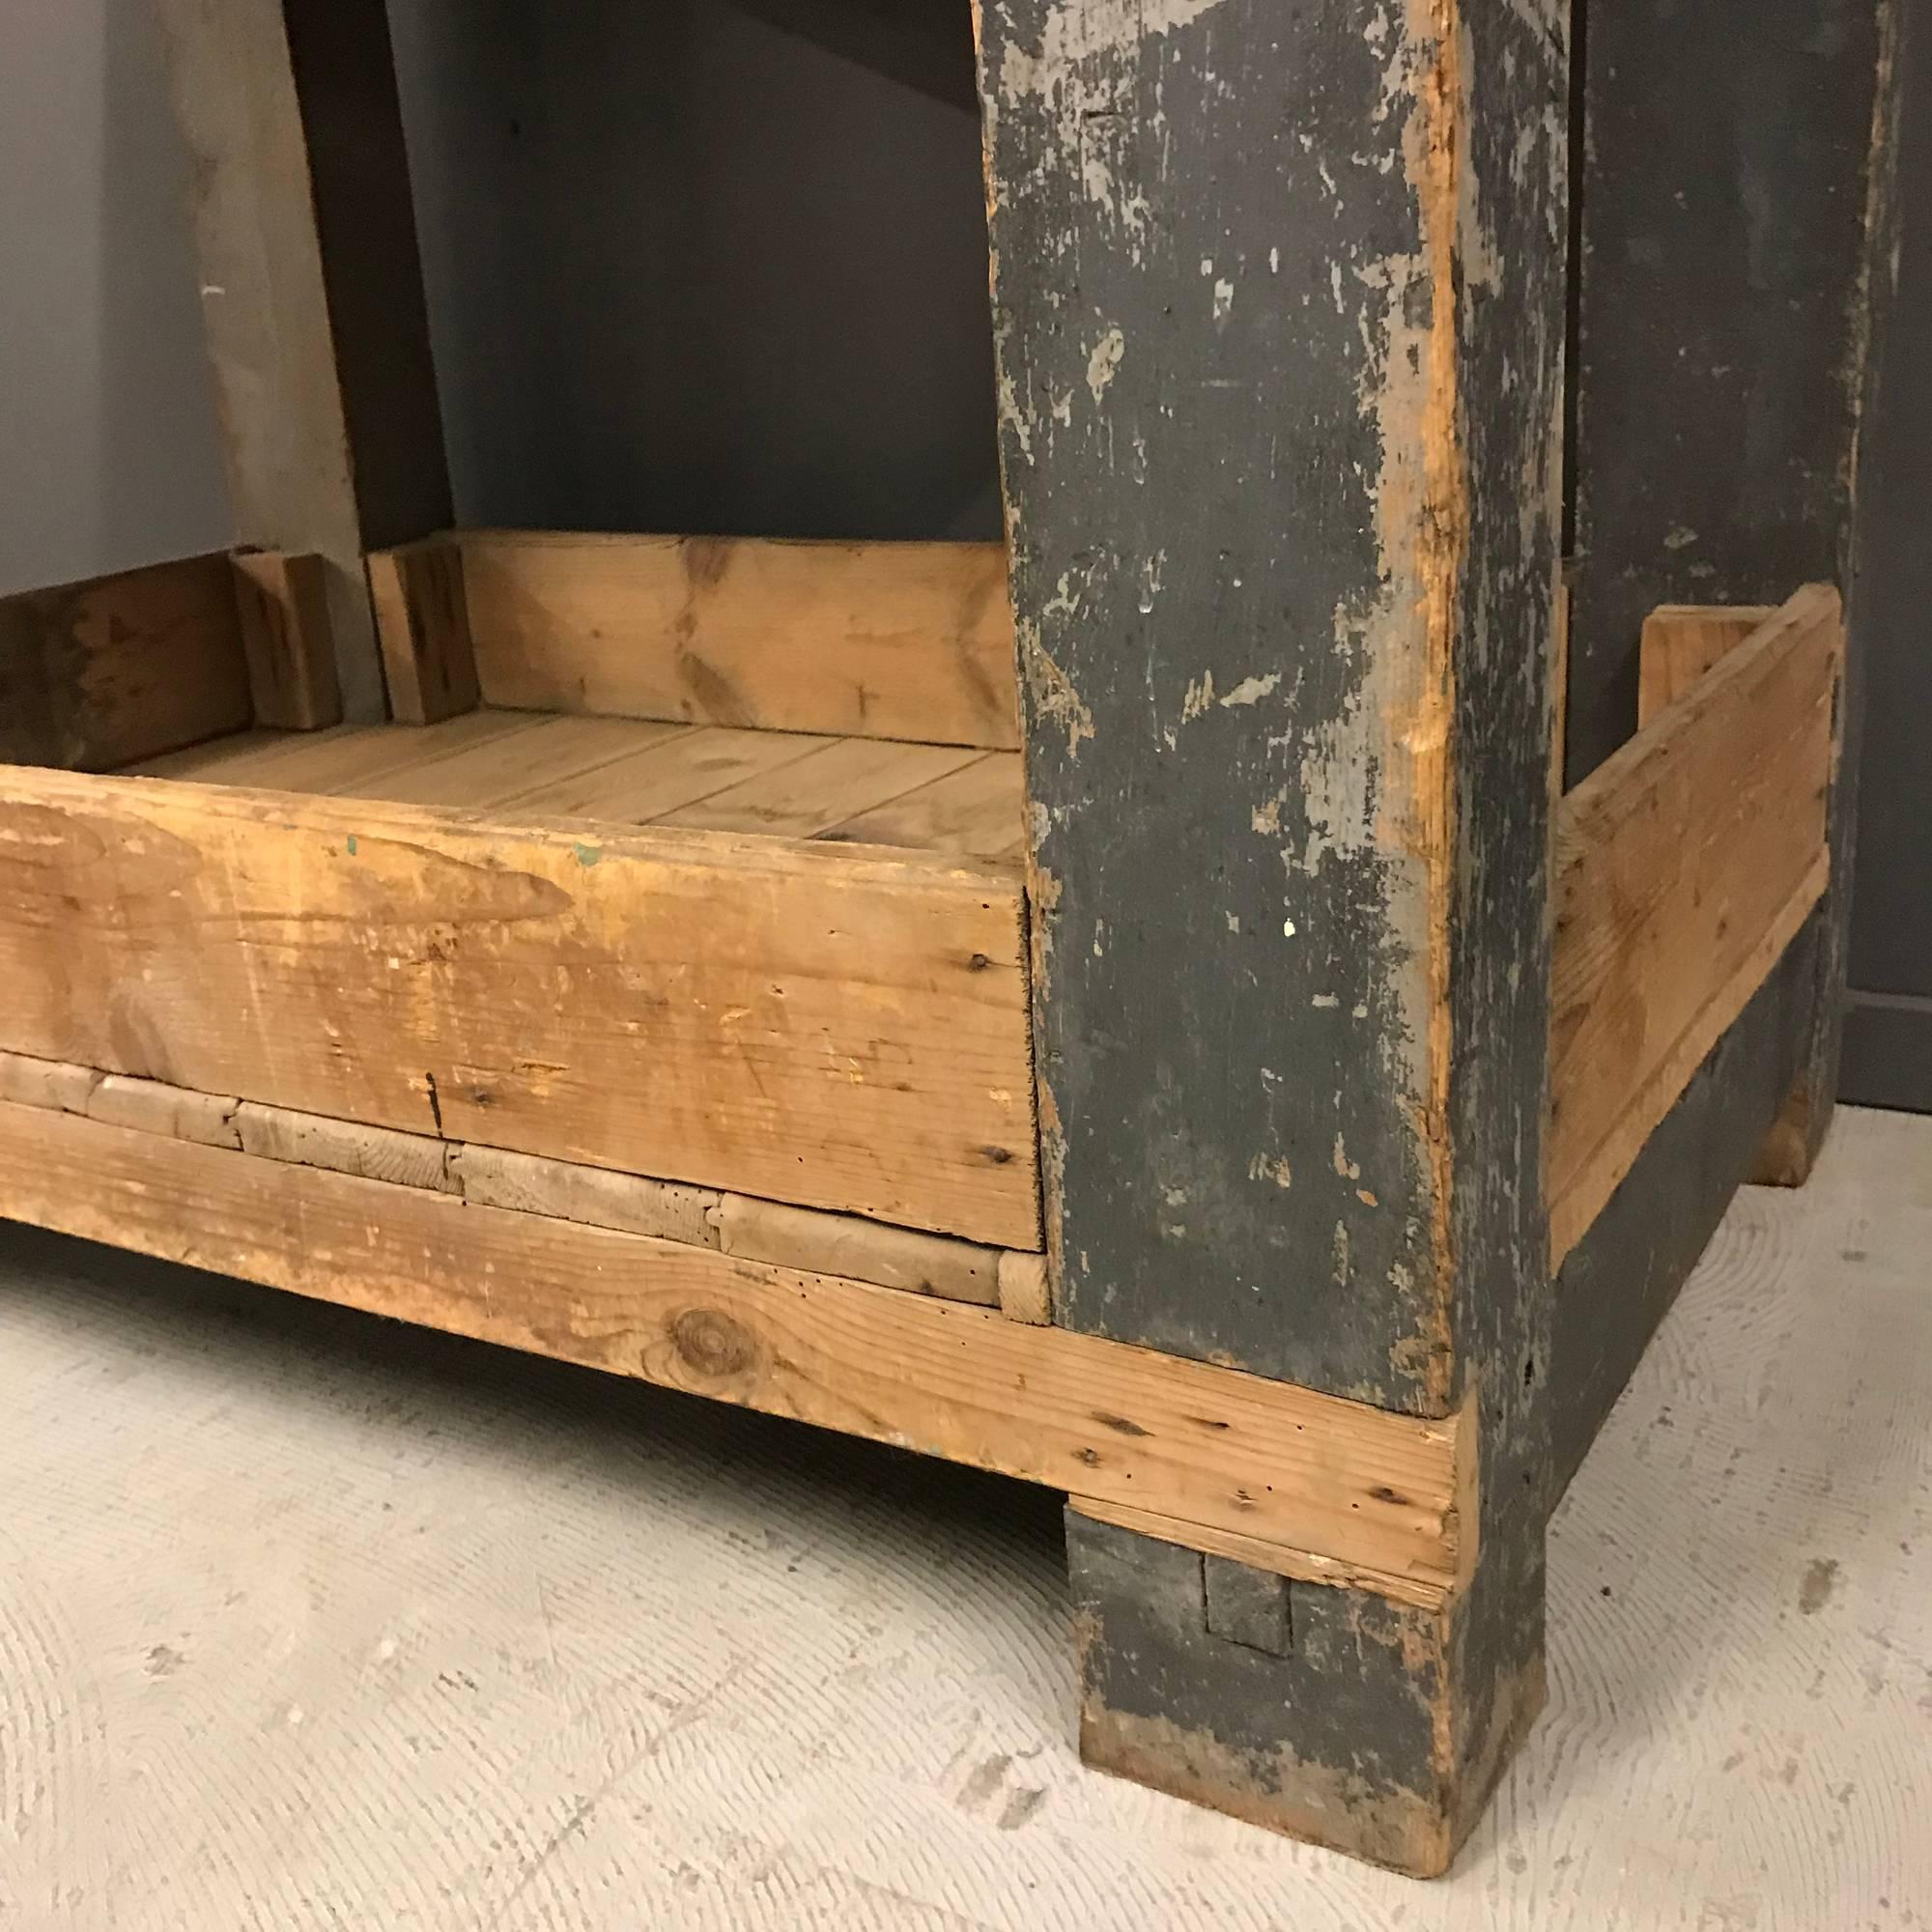 Small work bench with solid oak top and one drawer. Has been cleaned and treated against termites and woodworm.
France, early 20th century
Size of this small workbench with oak top
115 x 58 x 84 cm.